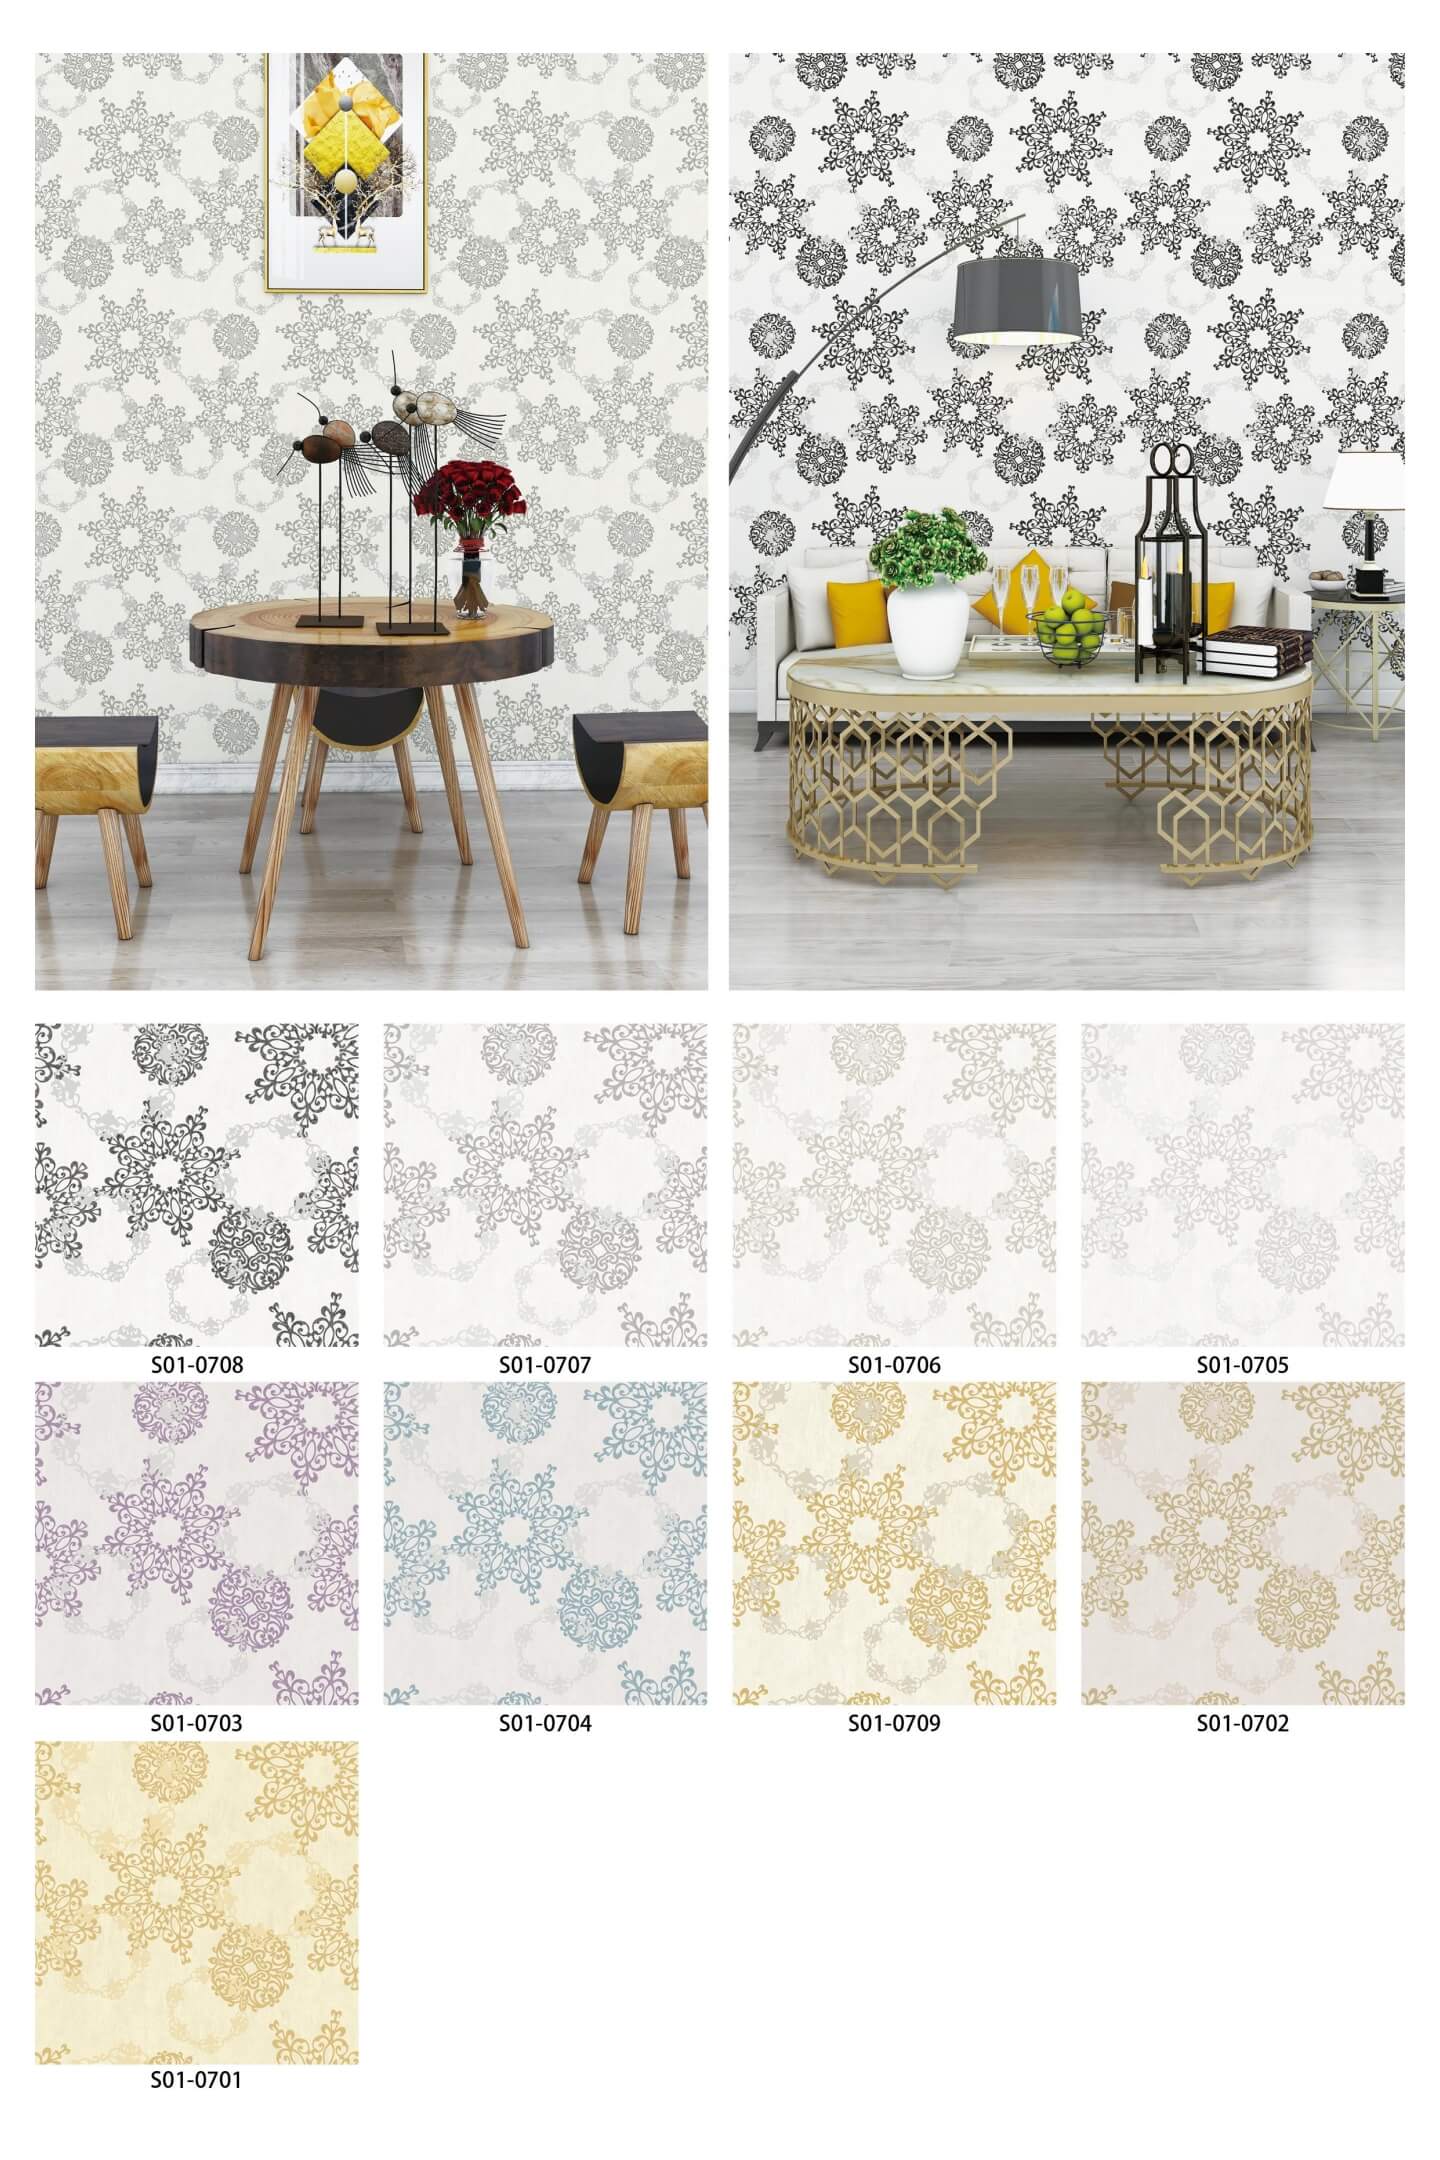 Floral Design Wallpapers Manufacture With High-Quality PVC Material Designer Premium Quality Water-resistant Wallpaper (16)